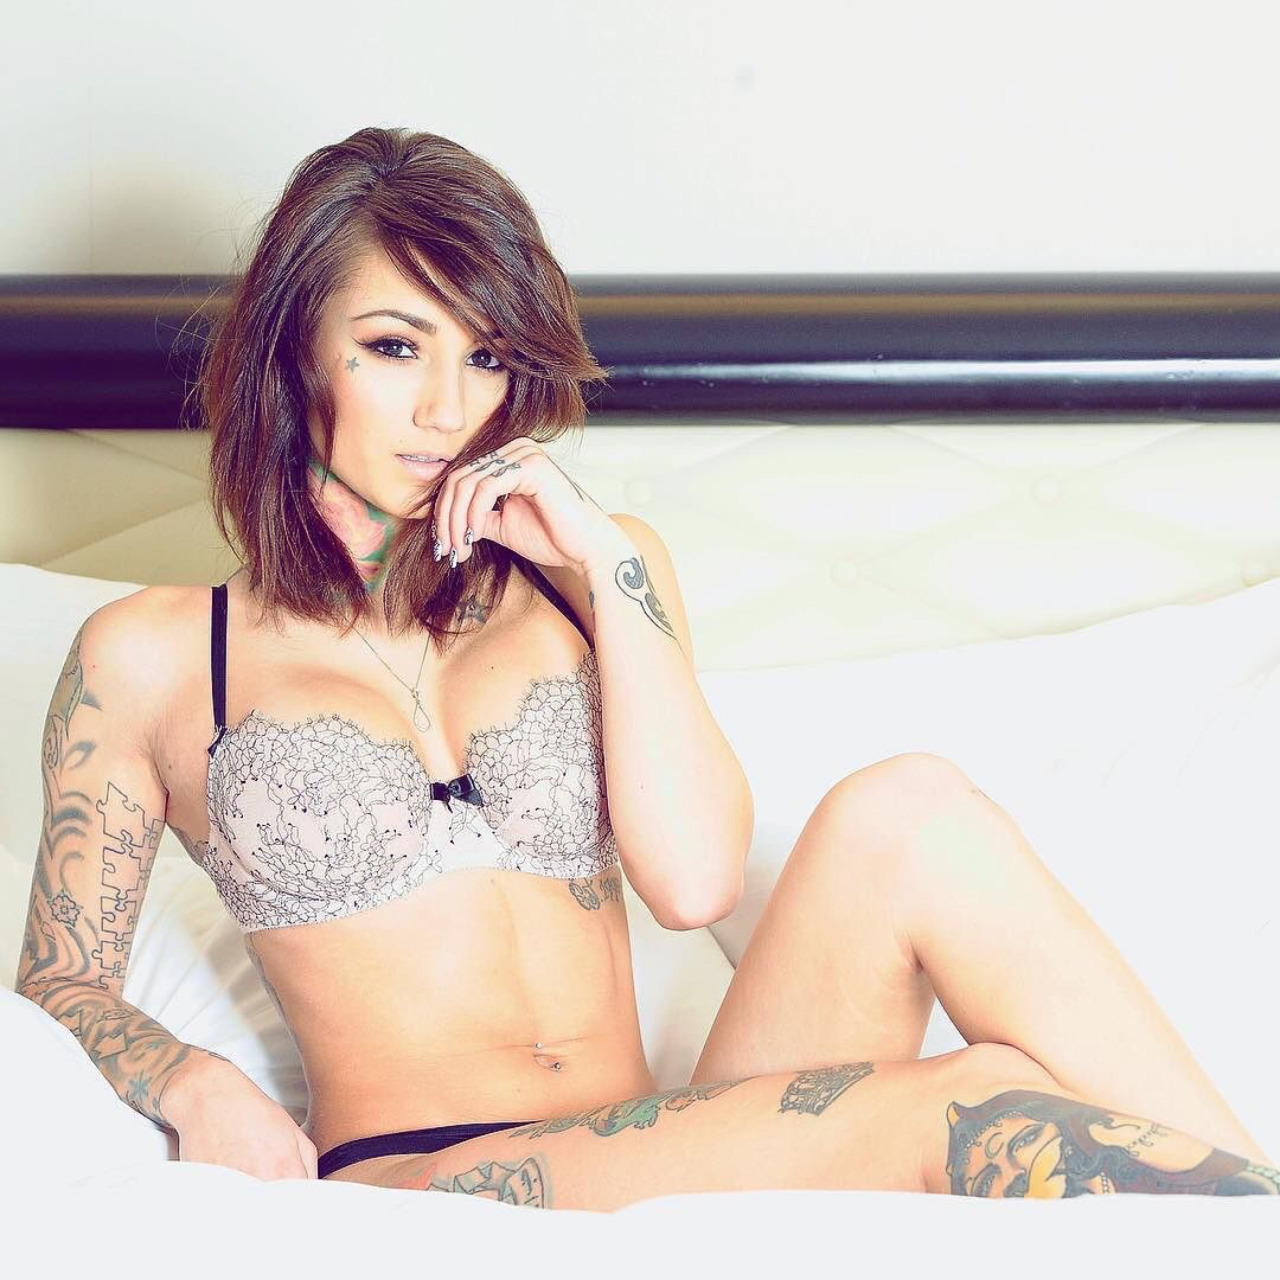 gorg-babes:  the hottest inked ones —&gt; http://gorg-babes.tumblr.com #inked